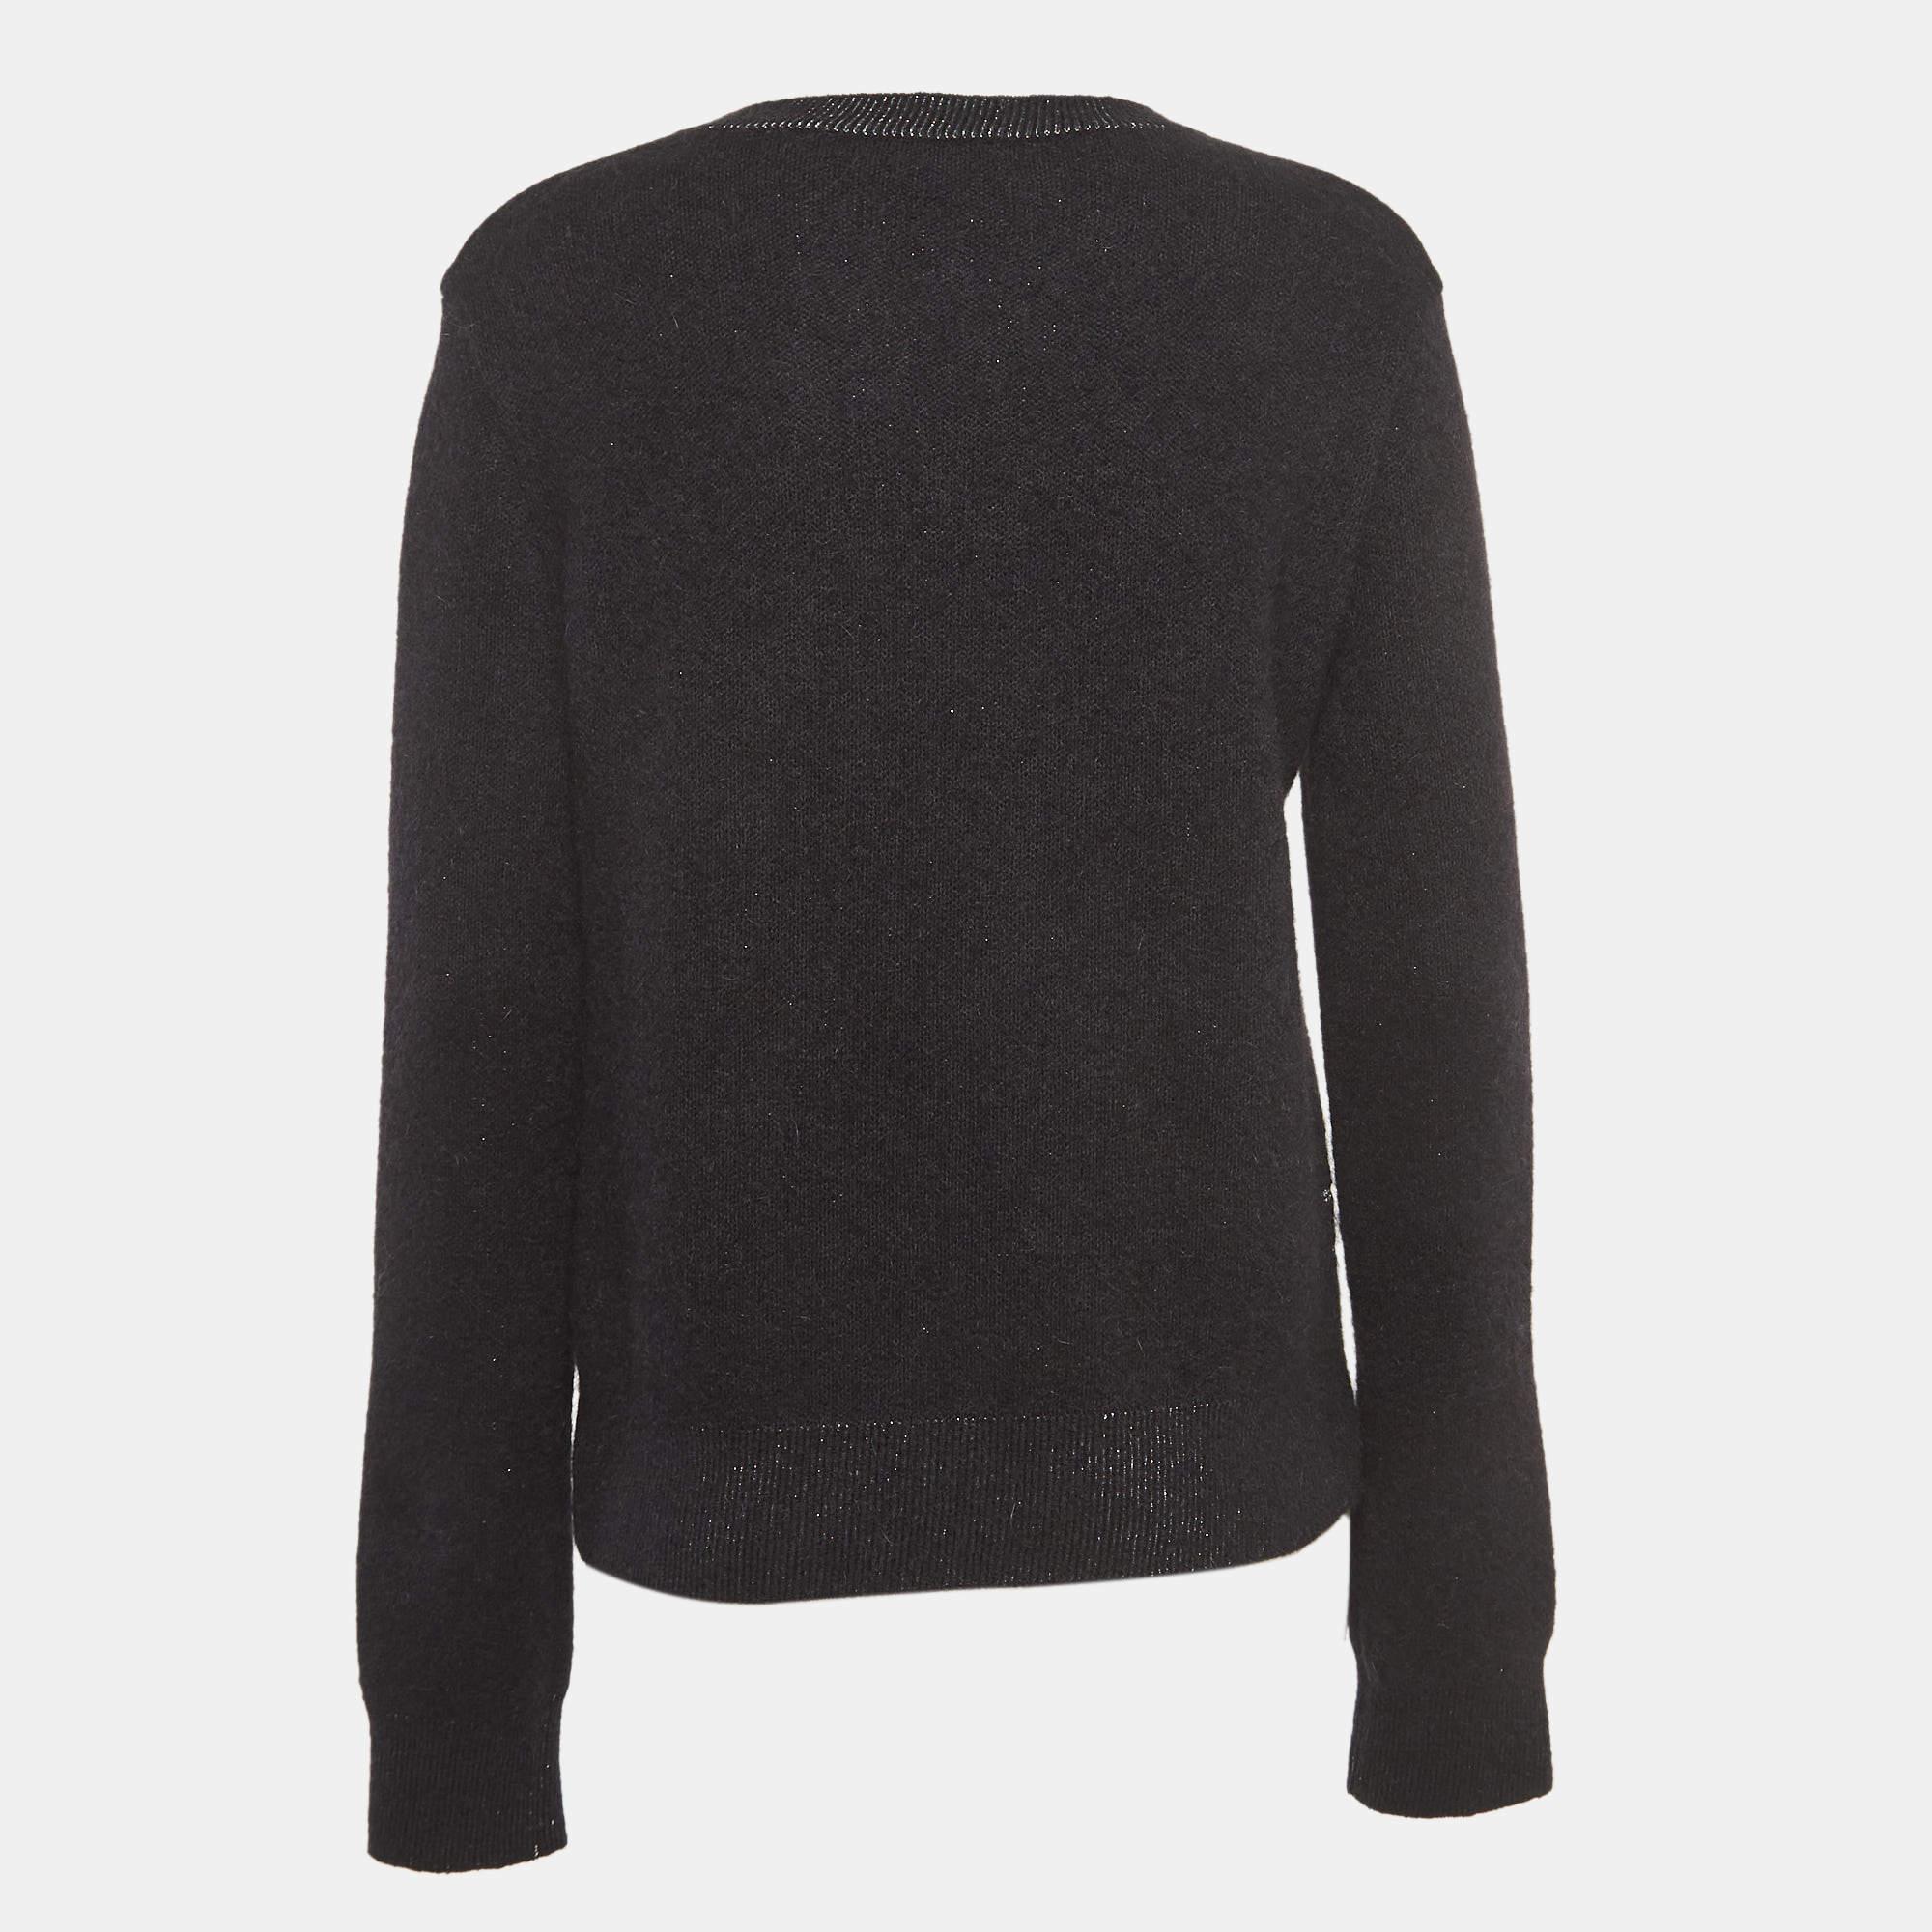 A winter outing without a sweater is next to impossible. Thankfully, a stylish Saint Laurent sweater like this will always enrich your outfit effortlessly. Designed with quality fabrics, this sweater is both snug and stylish.

